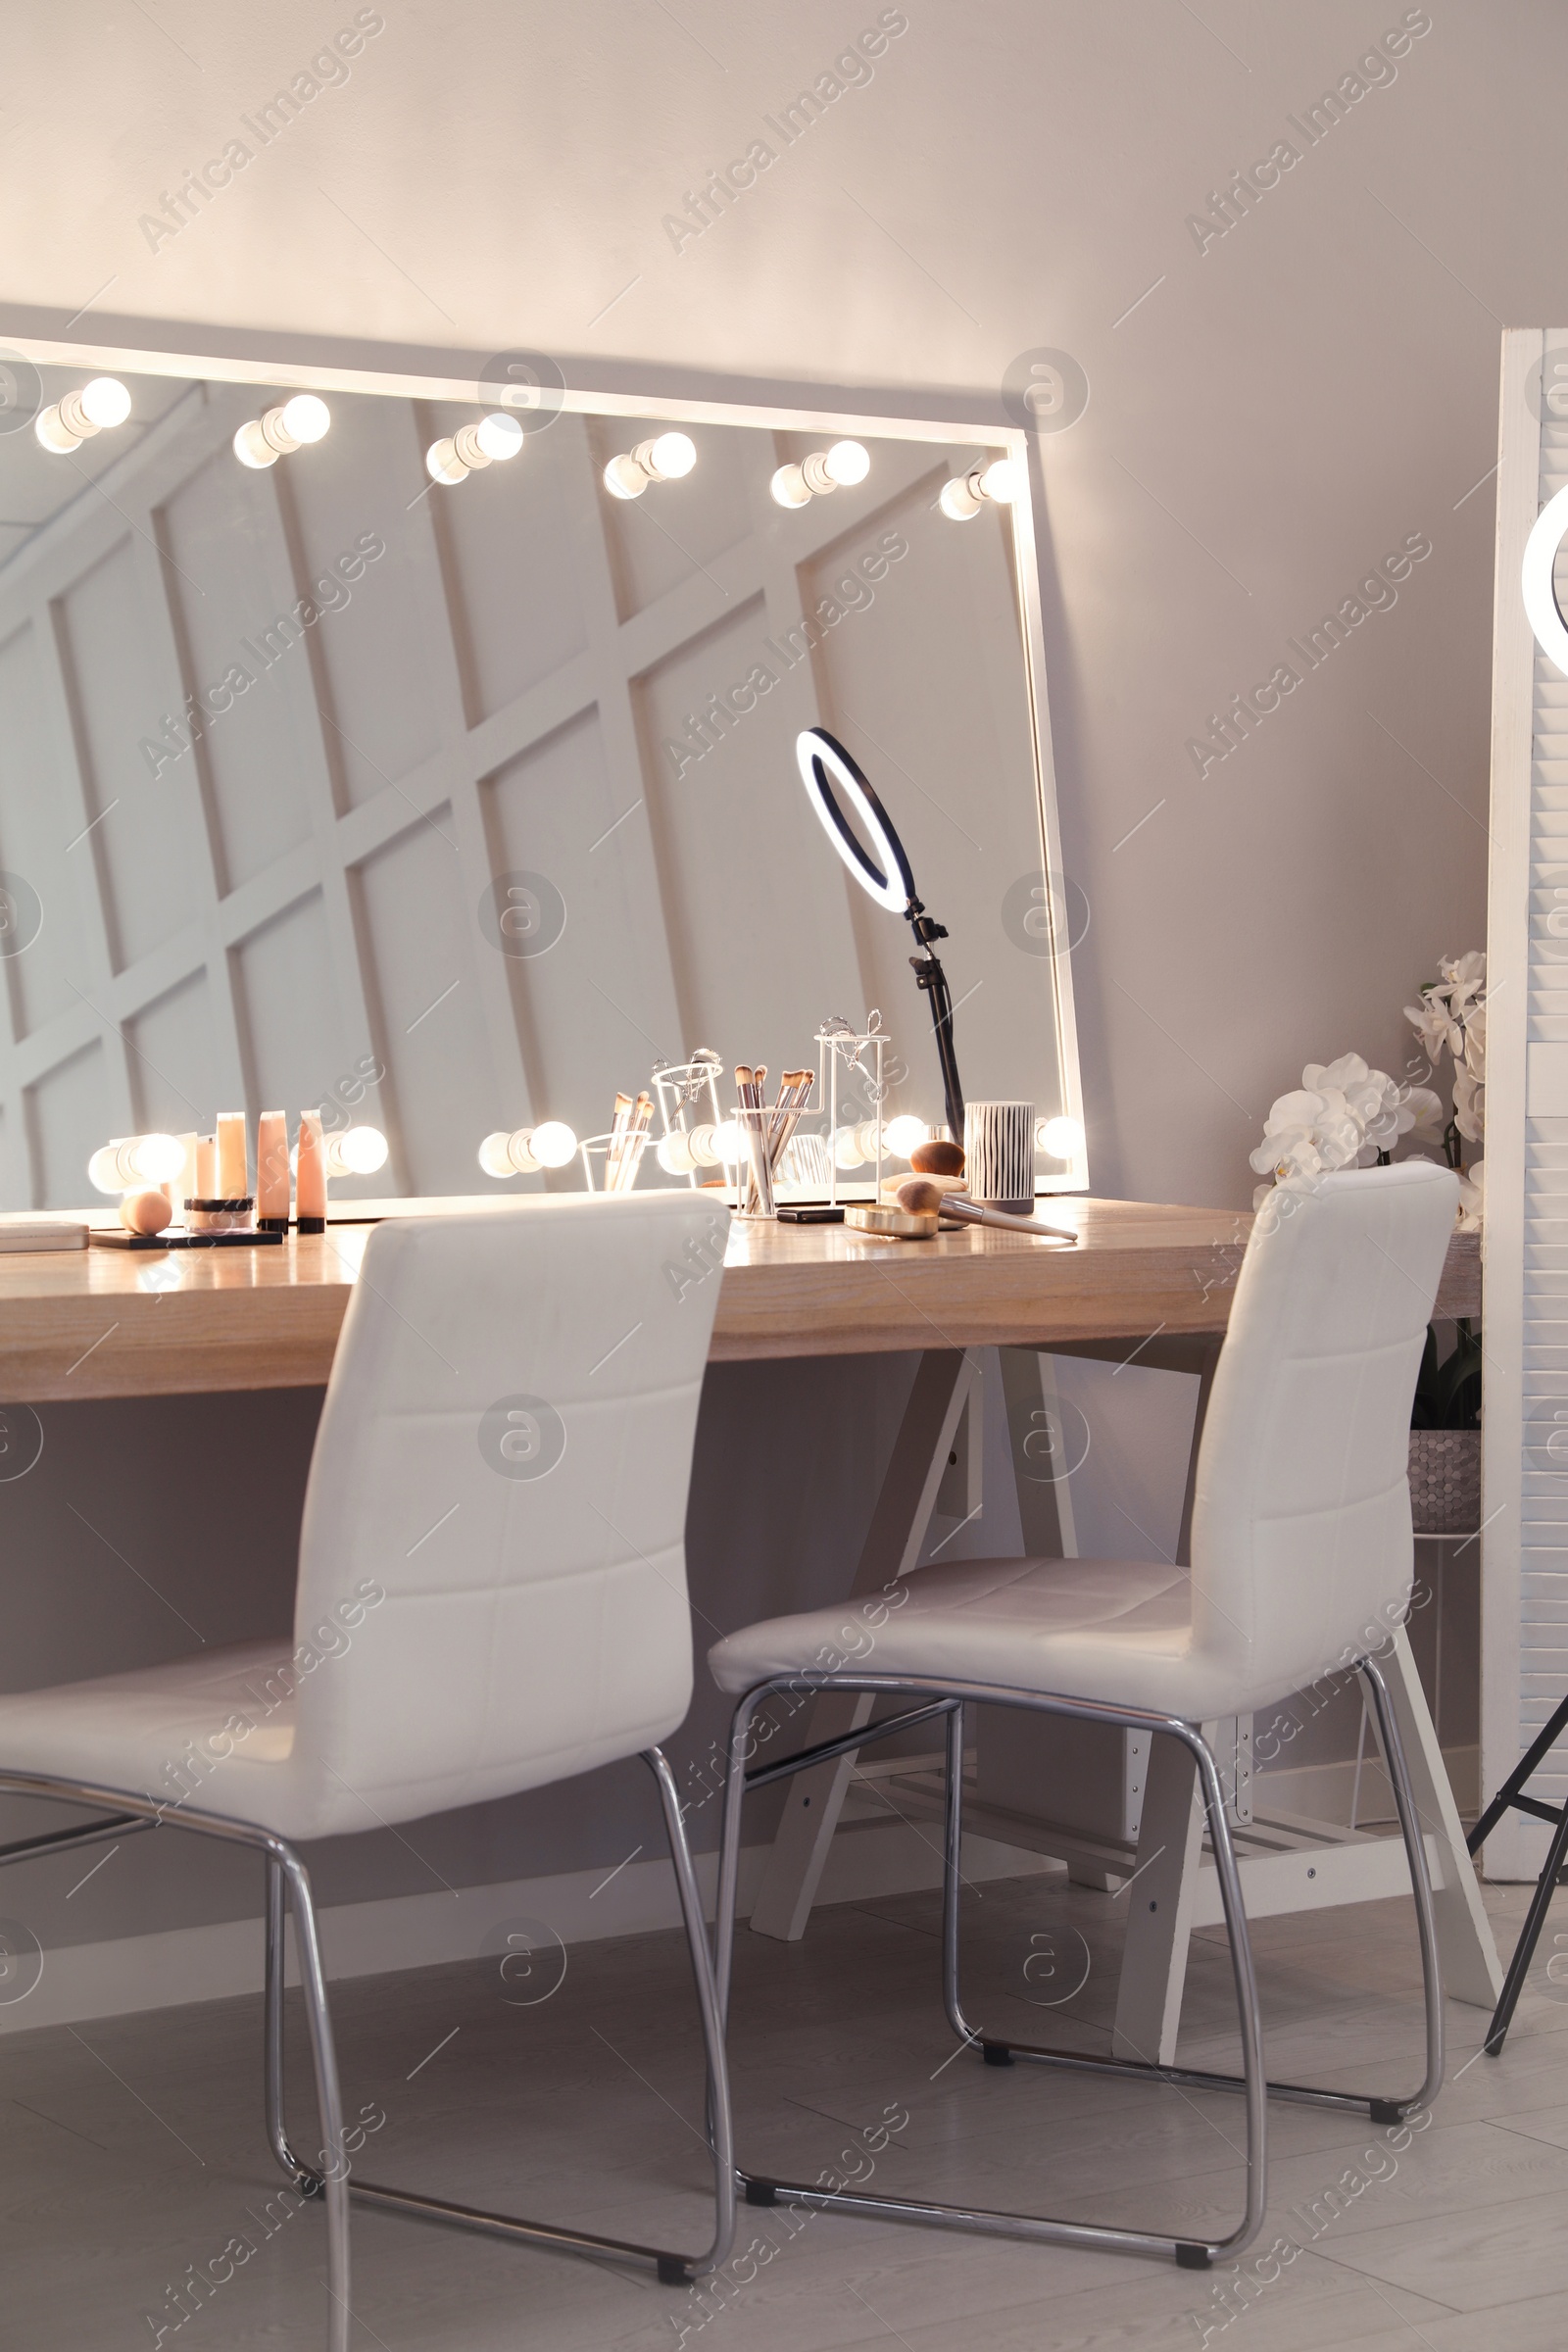 Photo of Modern mirror with light bulbs on dressing table in makeup room